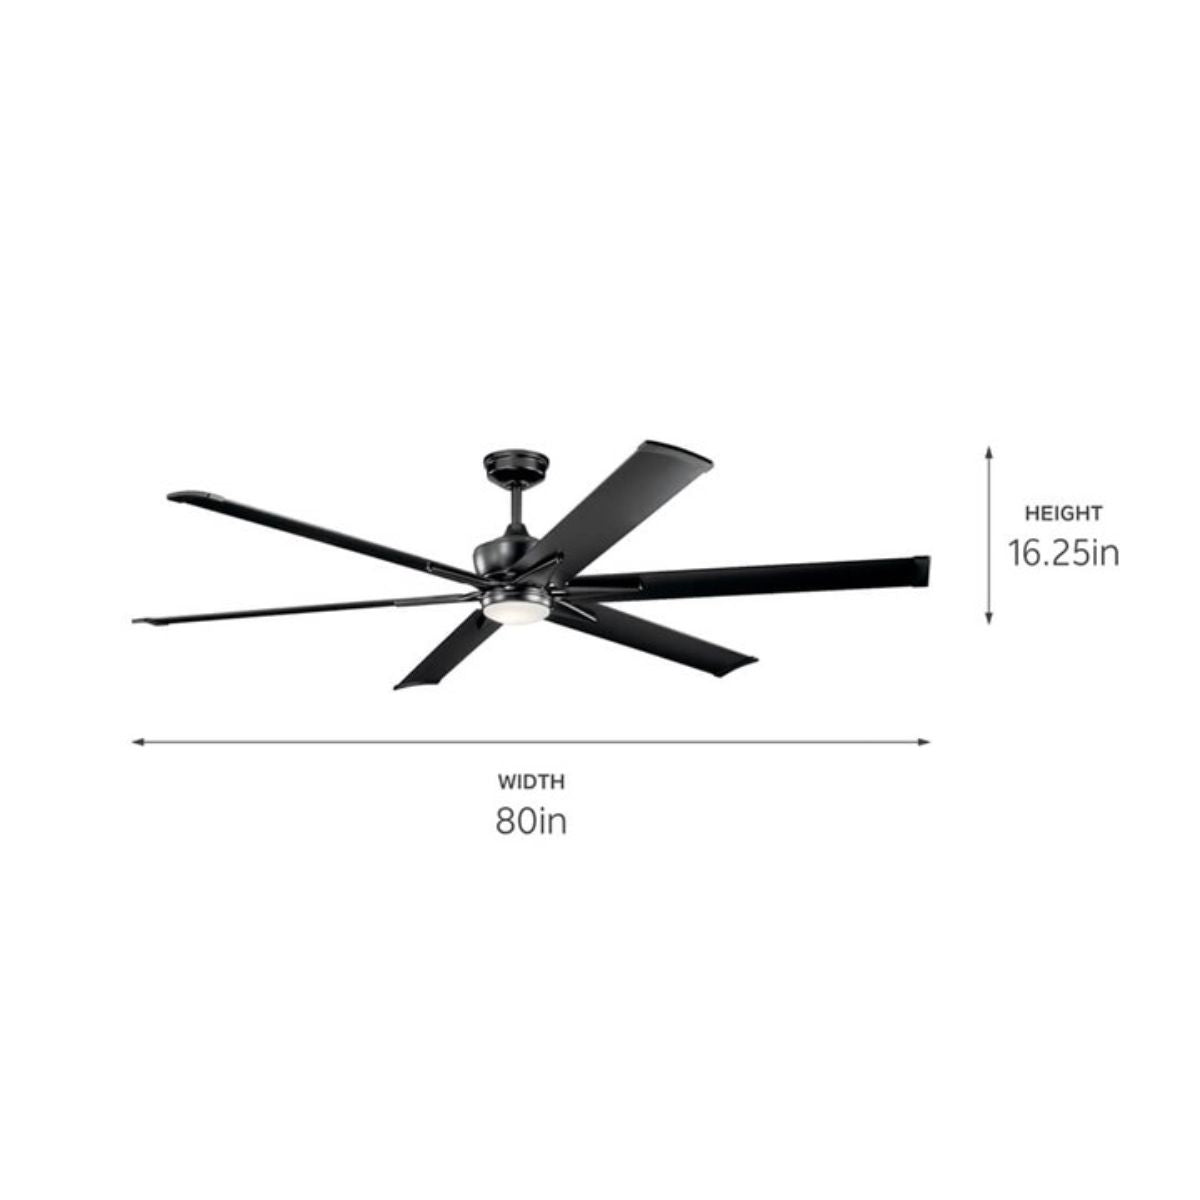 Szeplo Patio 80 Inch Windmill Outdoor Ceiling Fan With Light, Wall Control Included